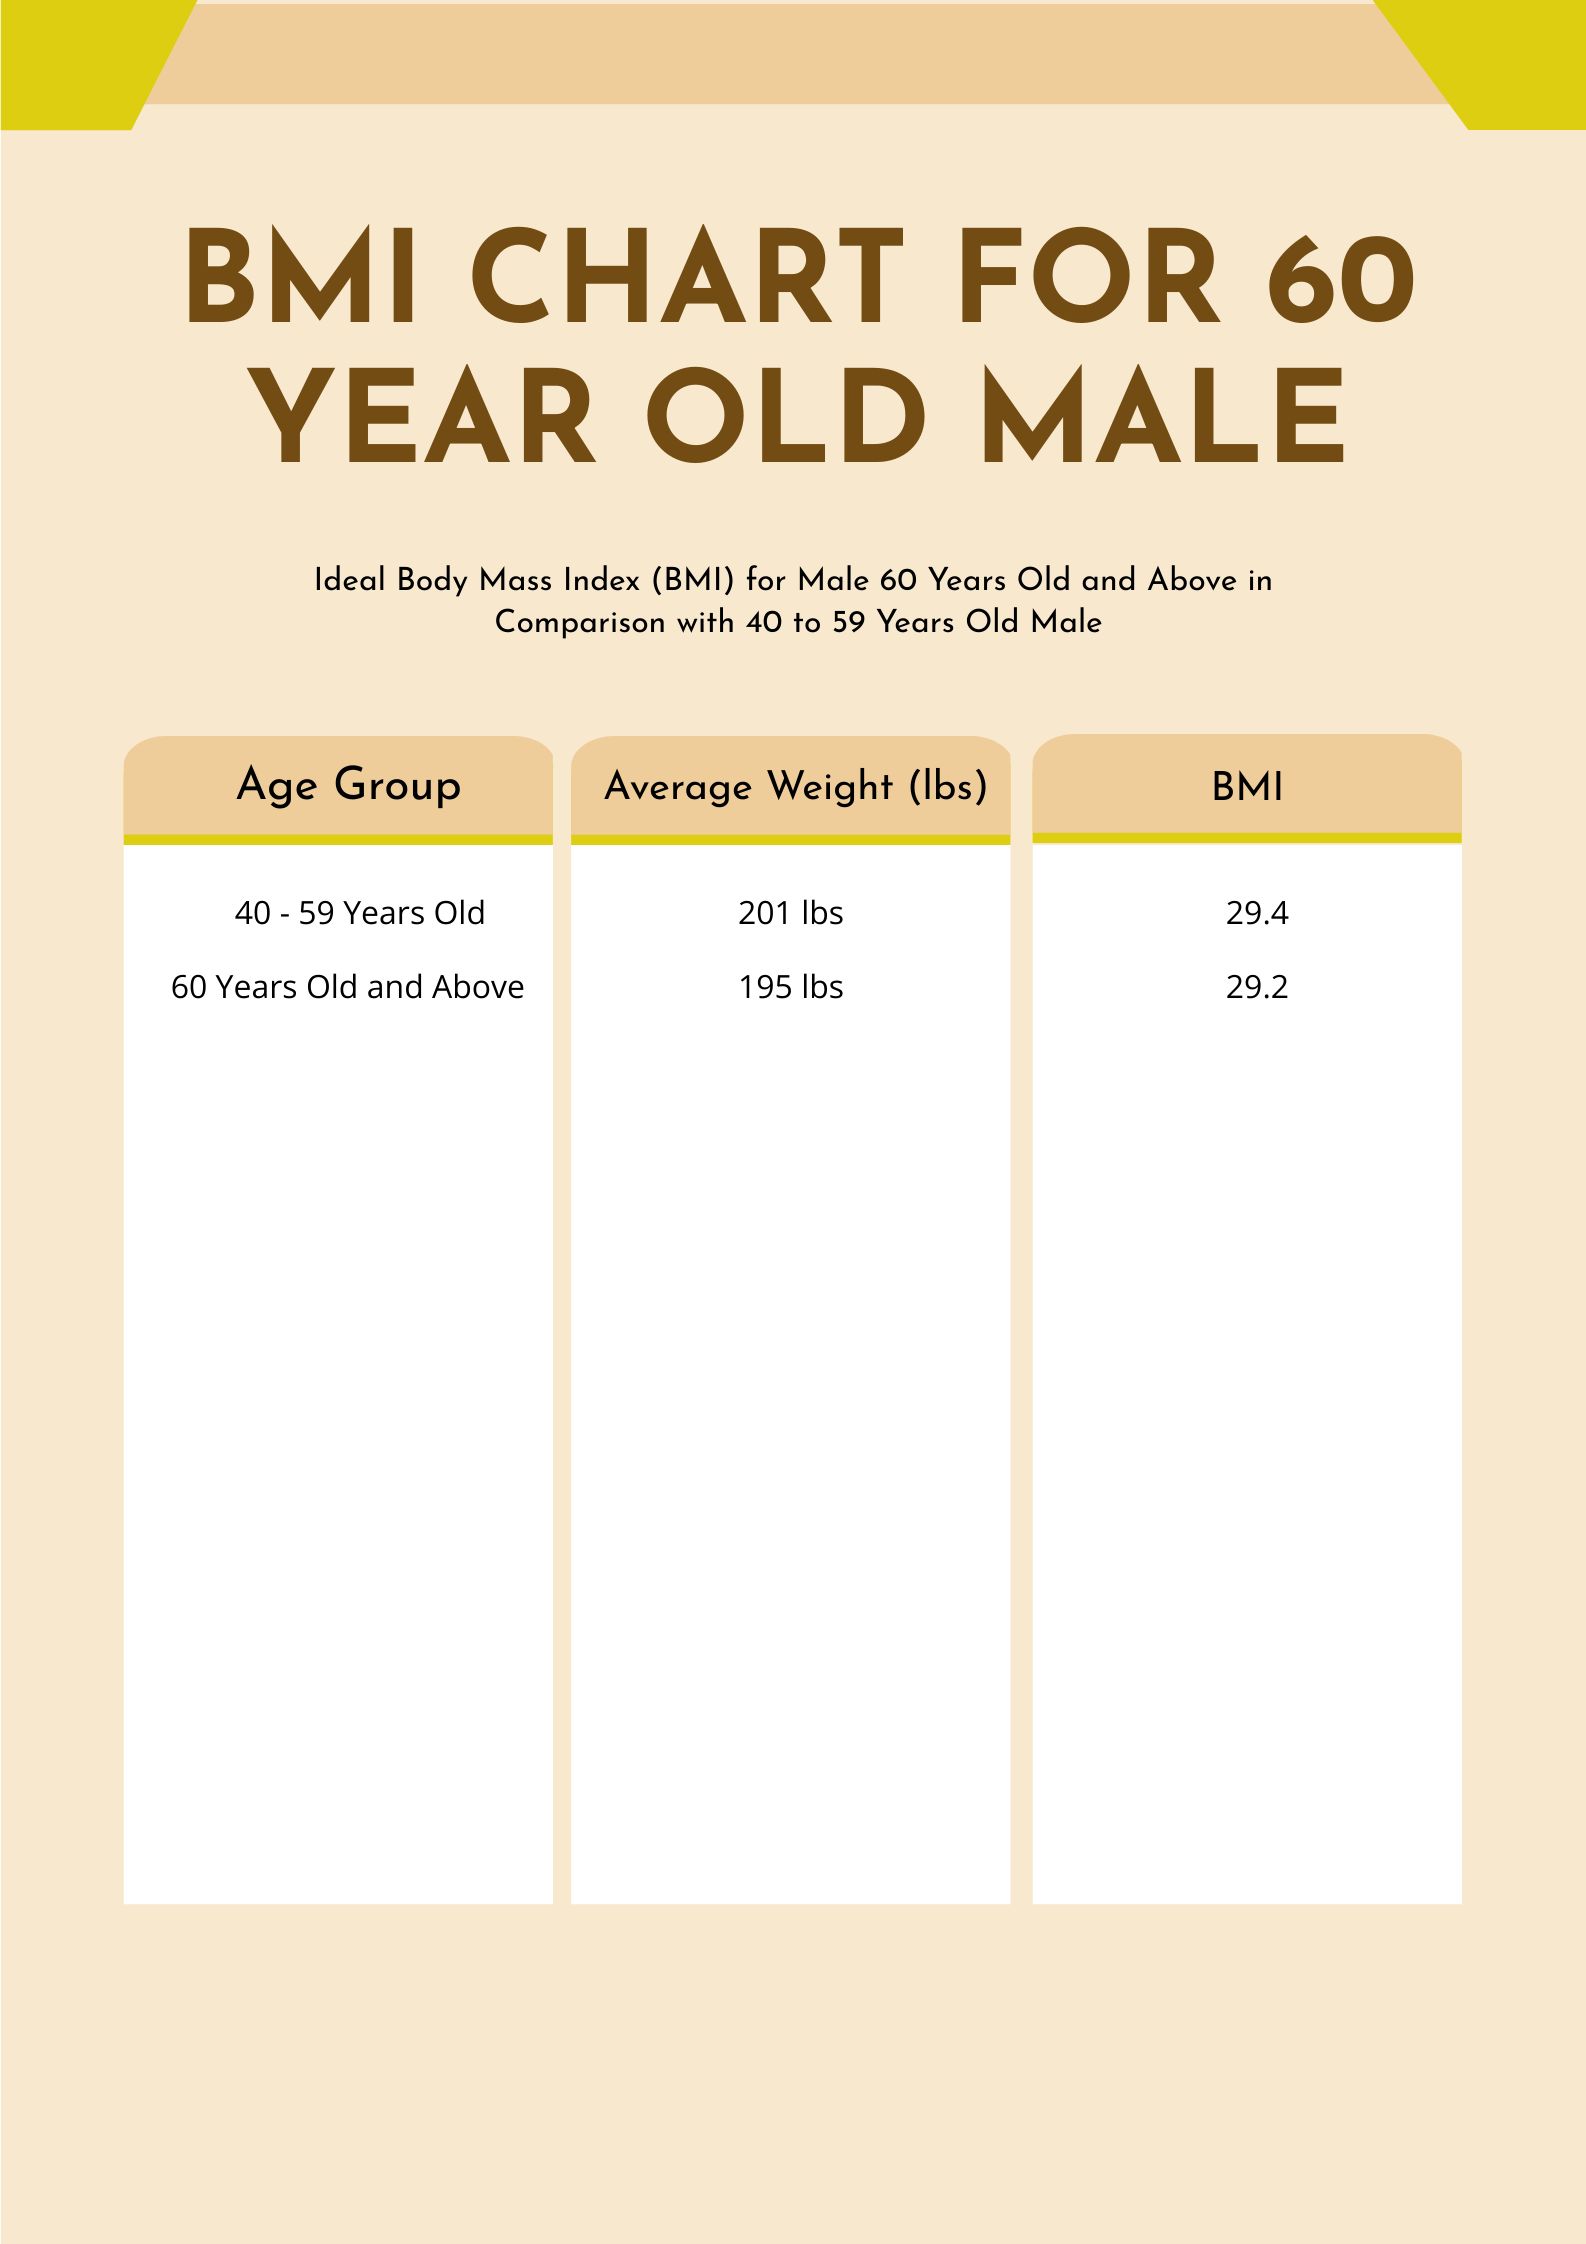 BMI Chart For 60 Year Old Male in PDF, Illustrator